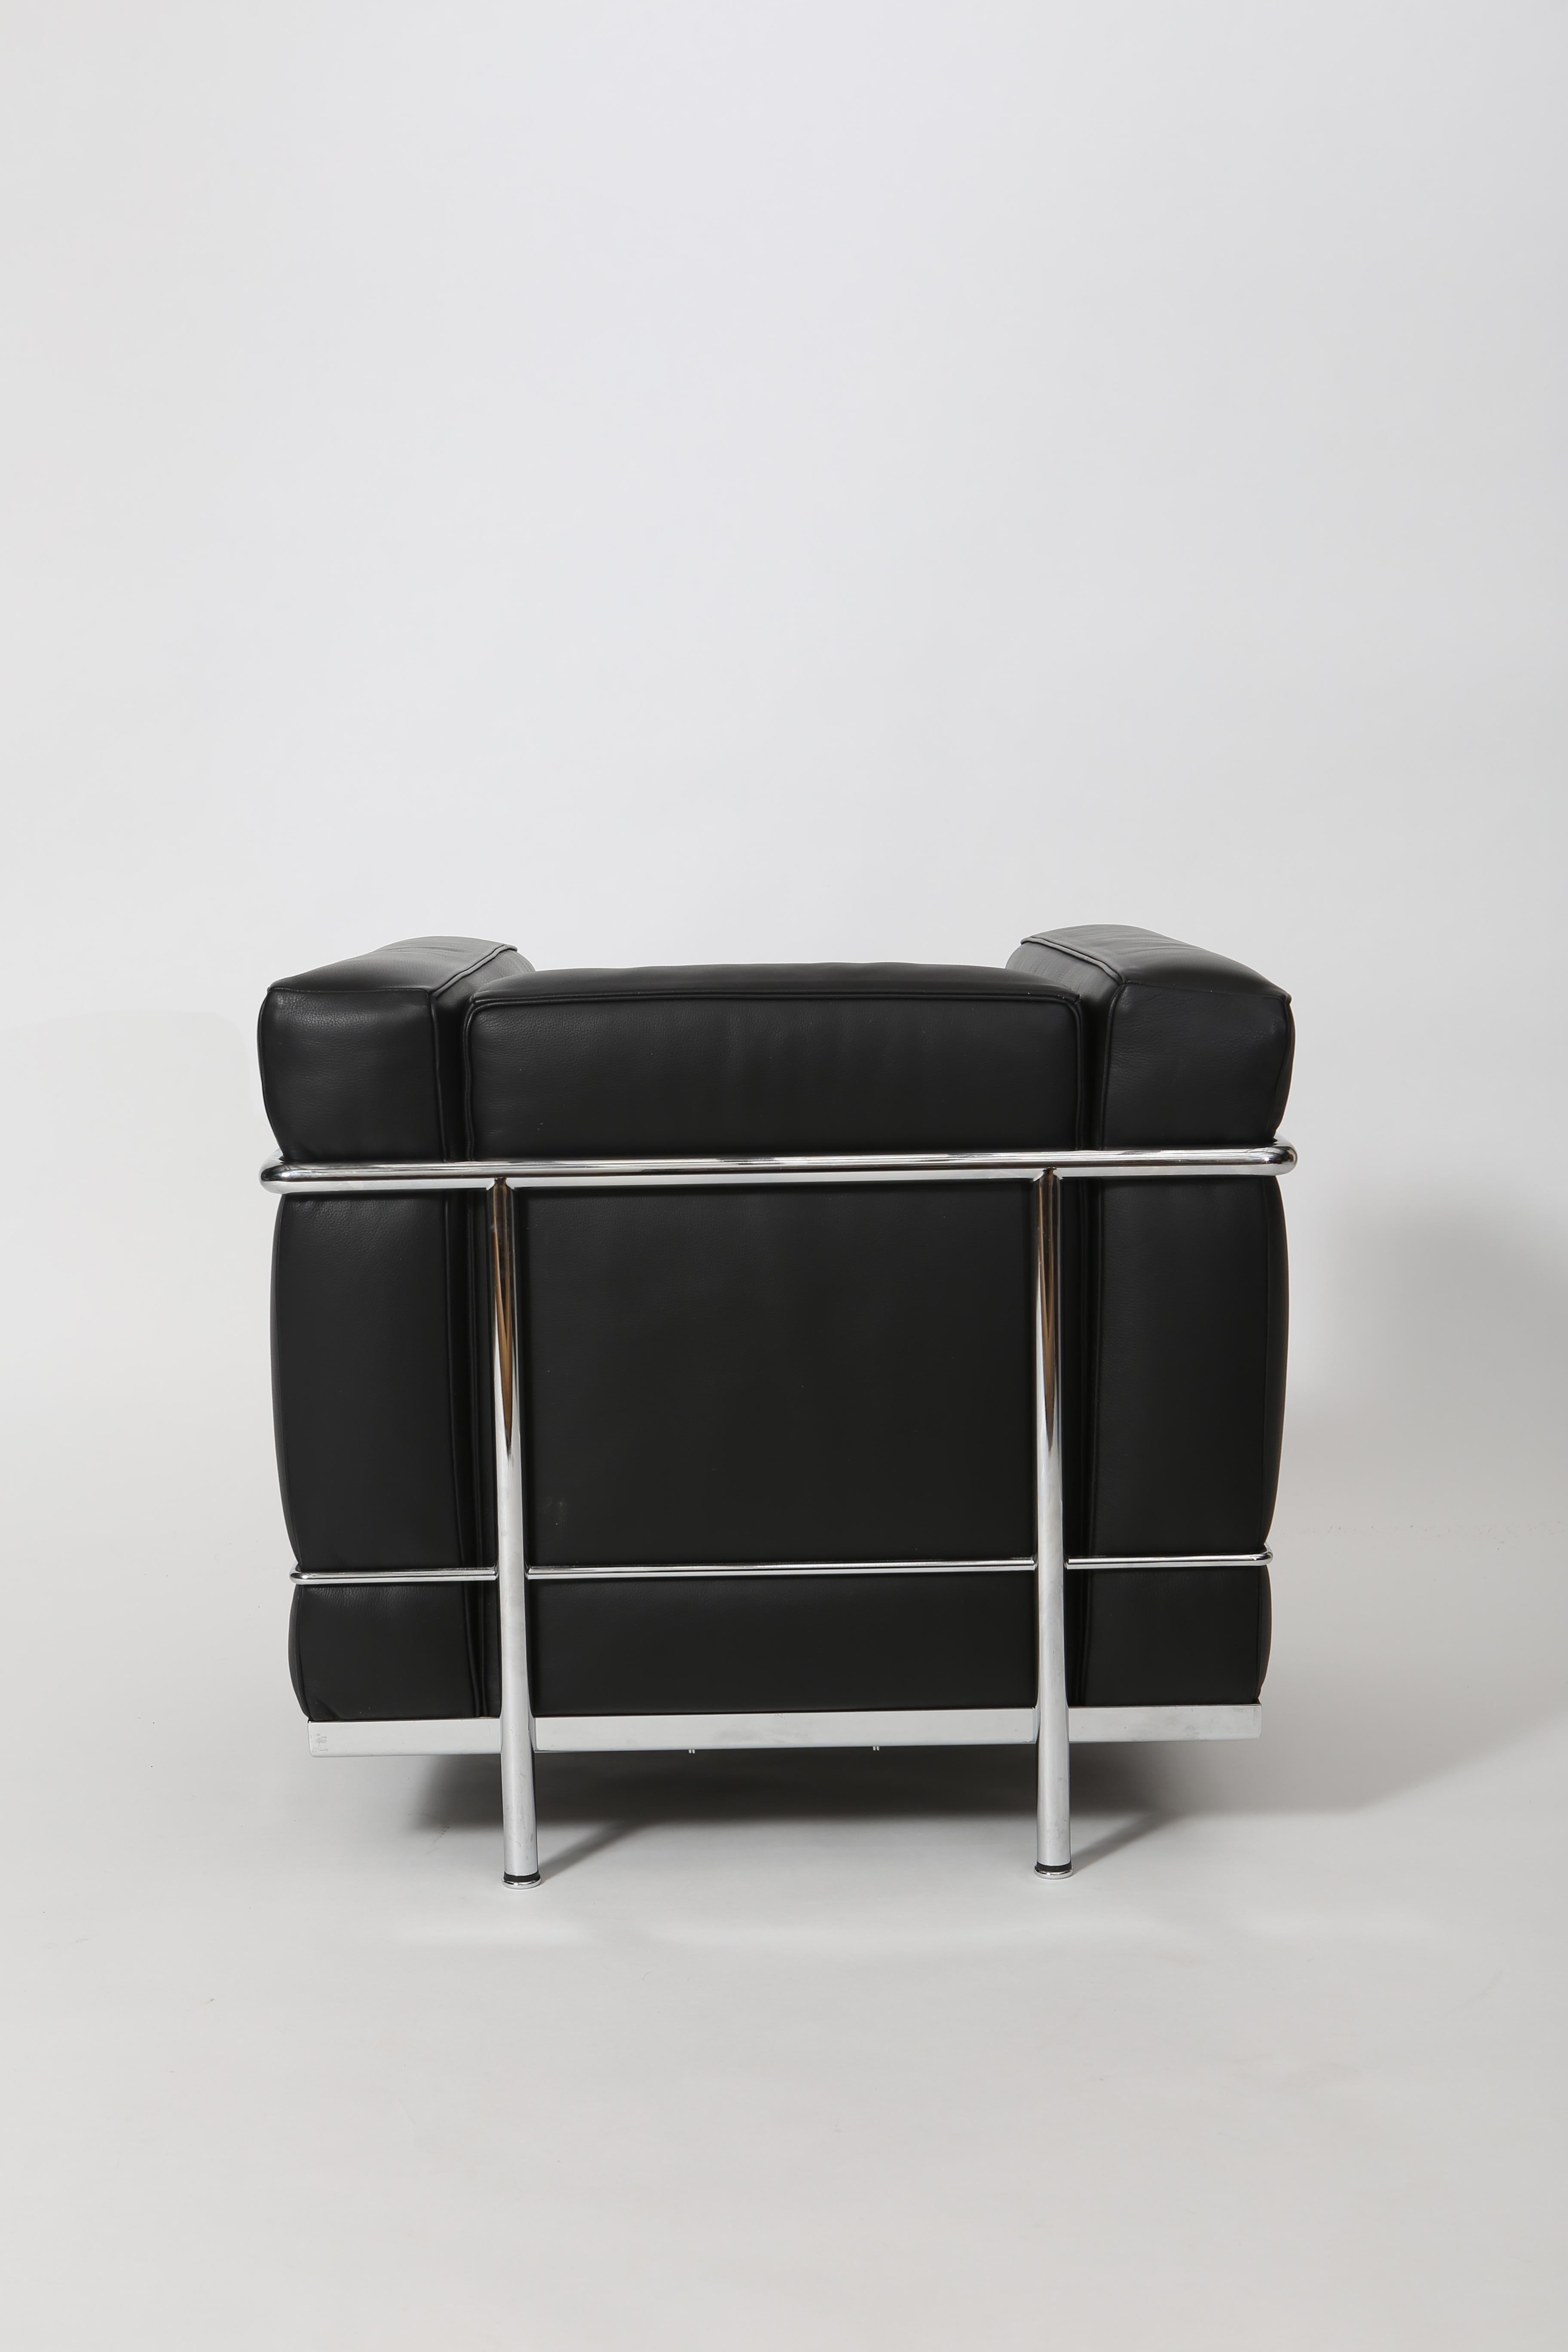 Based on the designs of Le Corbusier, Cassina created the LC 2 line. A petite club chair built for smaller spaces. Full grain leather and chromed steel frame. In excellent condition. Made in Italy, circa 2000.